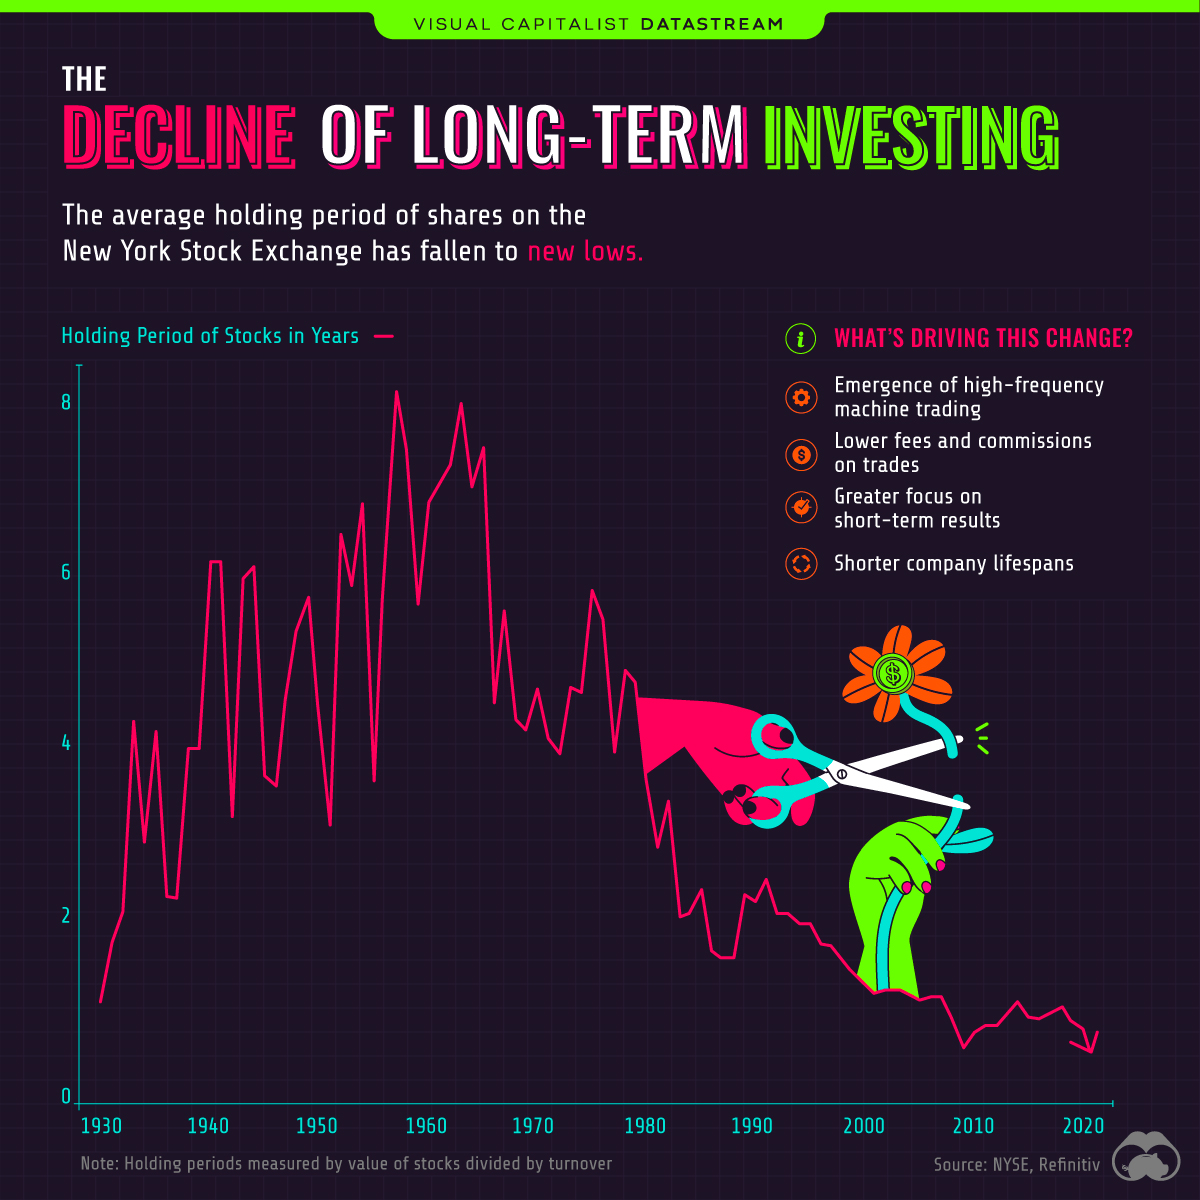 Decline of Long-term Investing